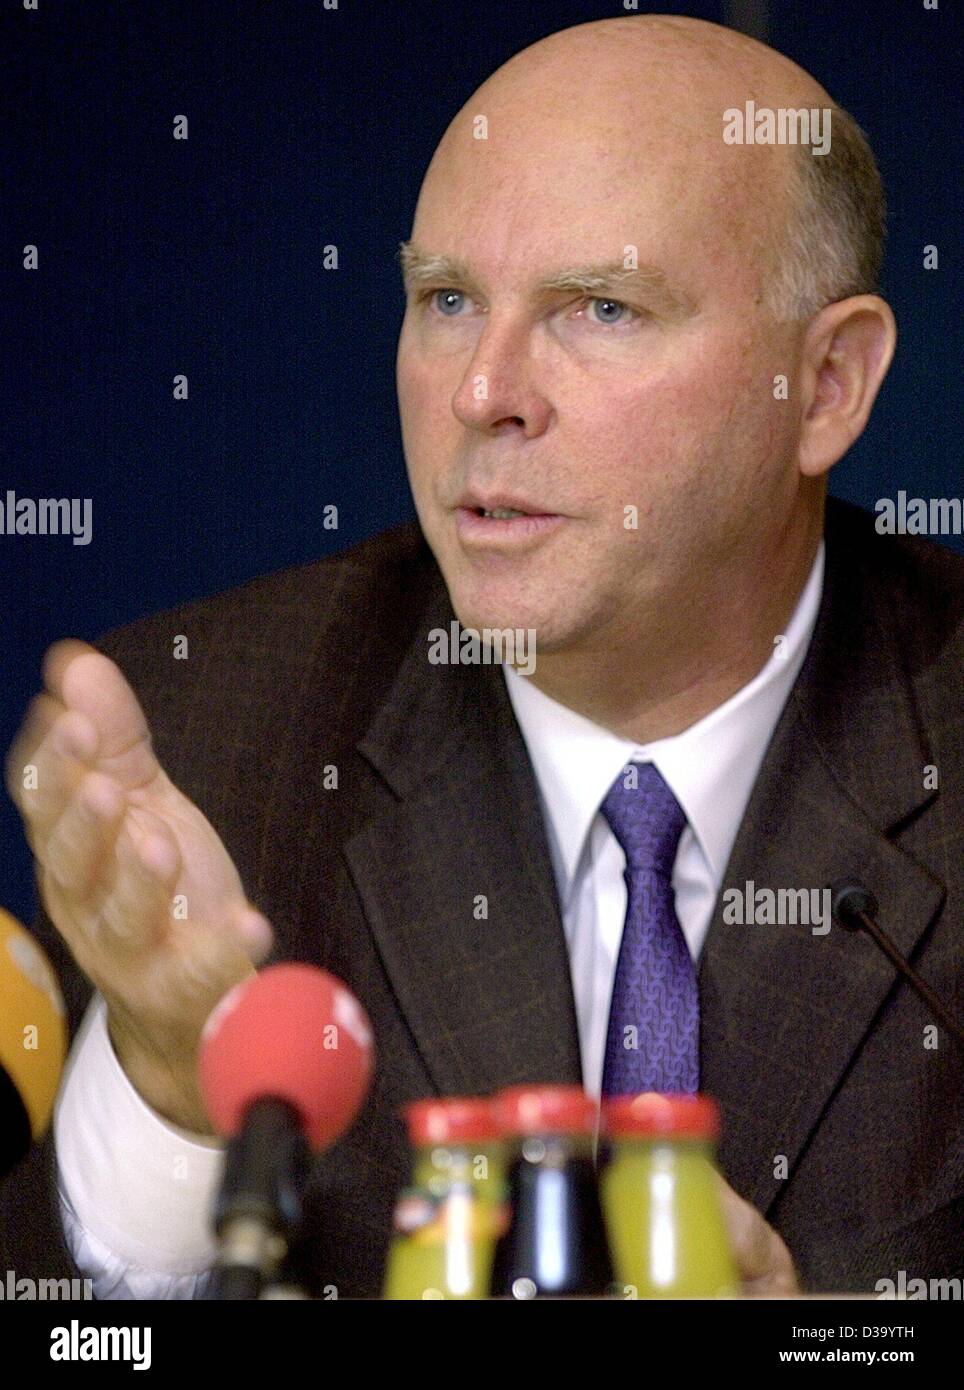 (dpa) - US scientist Craig Venter speaks at a press conference in Frankfurt, 13 March 2002. The 54-year-old biologist was awarded the Paul Ehrlich and Ludwig Darmstaedter Prize for his method of deciphering genomes. Venter was the first to decipher the entire genome of an organism in 1995. The virus Stock Photo